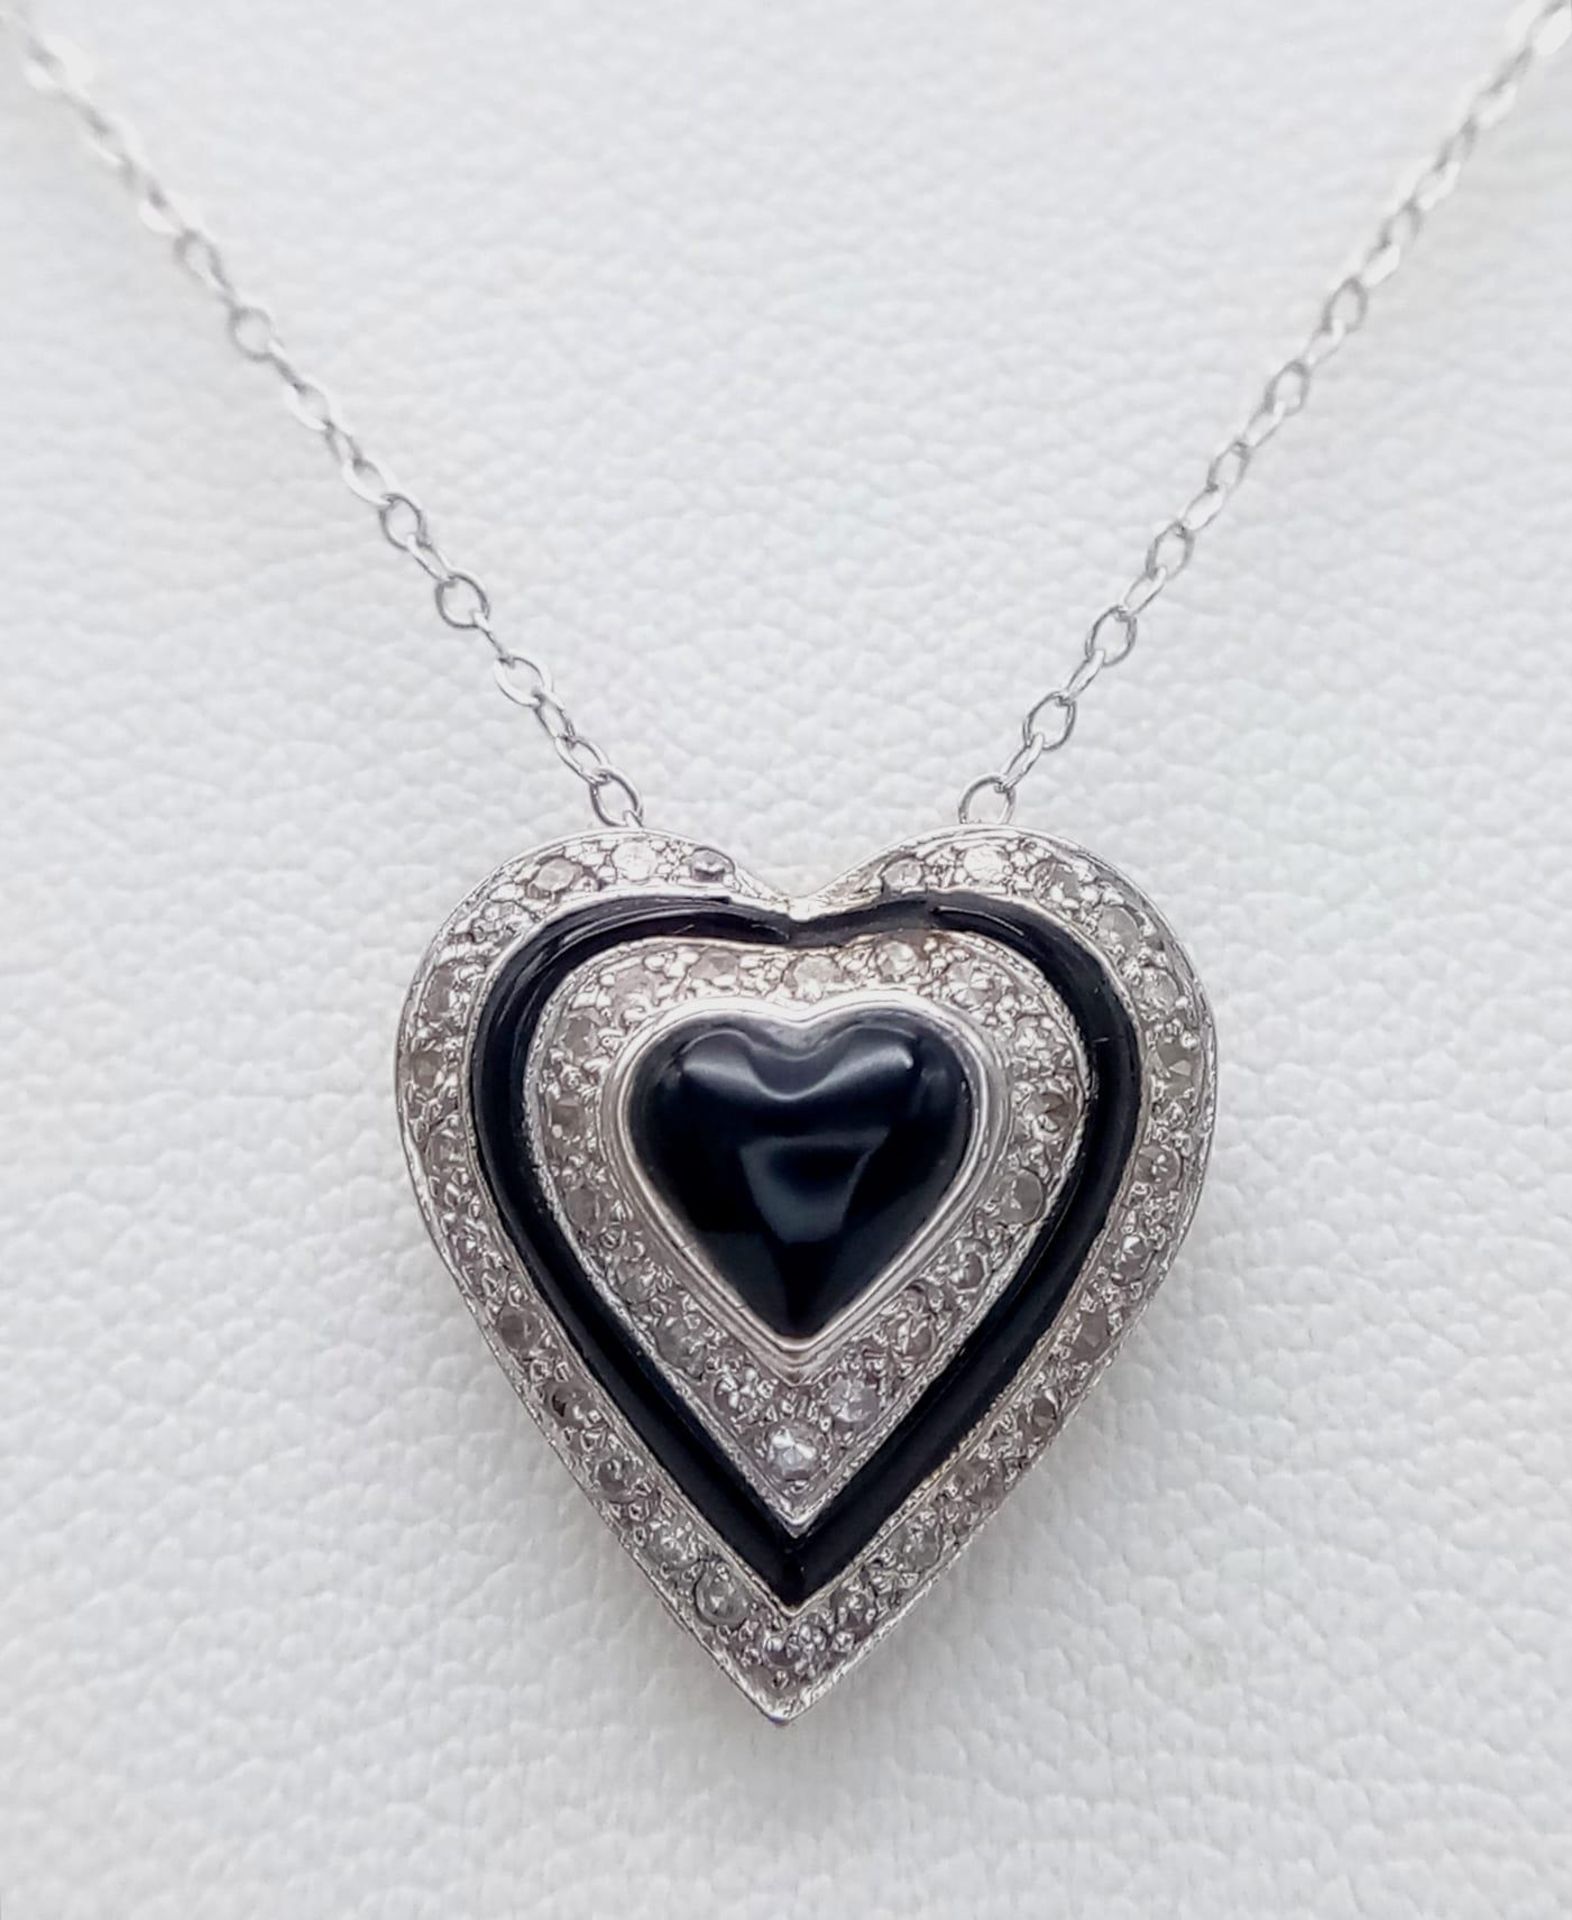 An 18K White Gold Diamond and Black Onyx Heart Pendant on a 9K White Gold Disappearing Necklace.